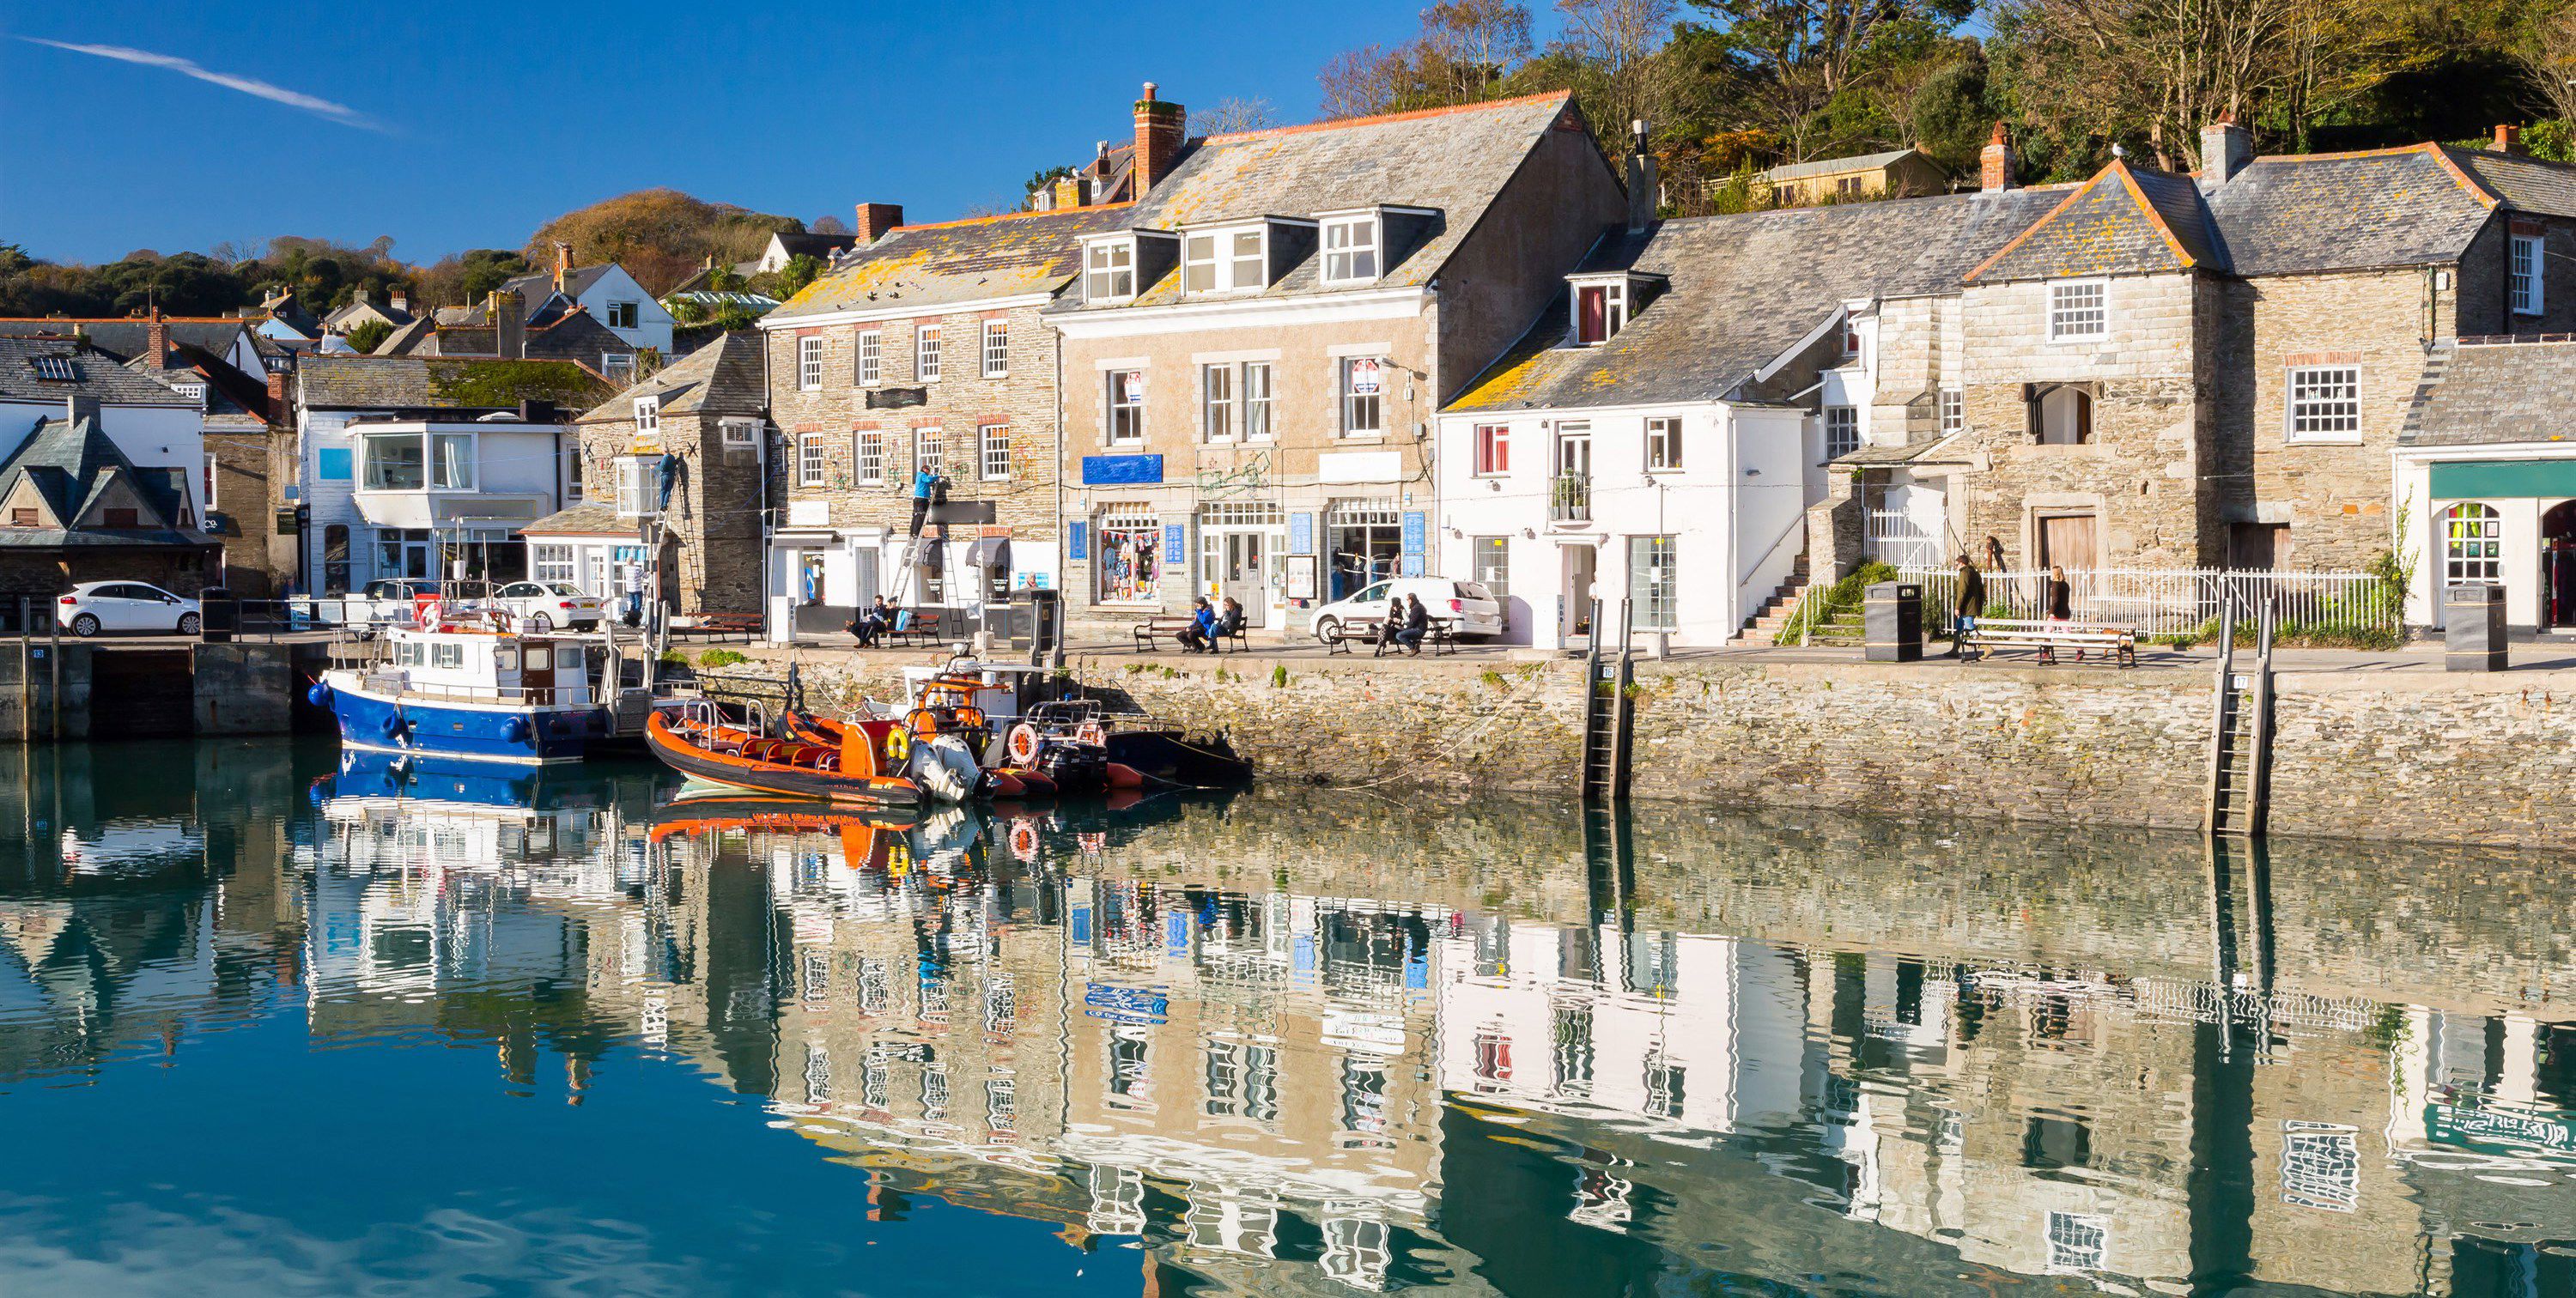 70+ Padstow campsites Best camping in Padstow, Cornwall